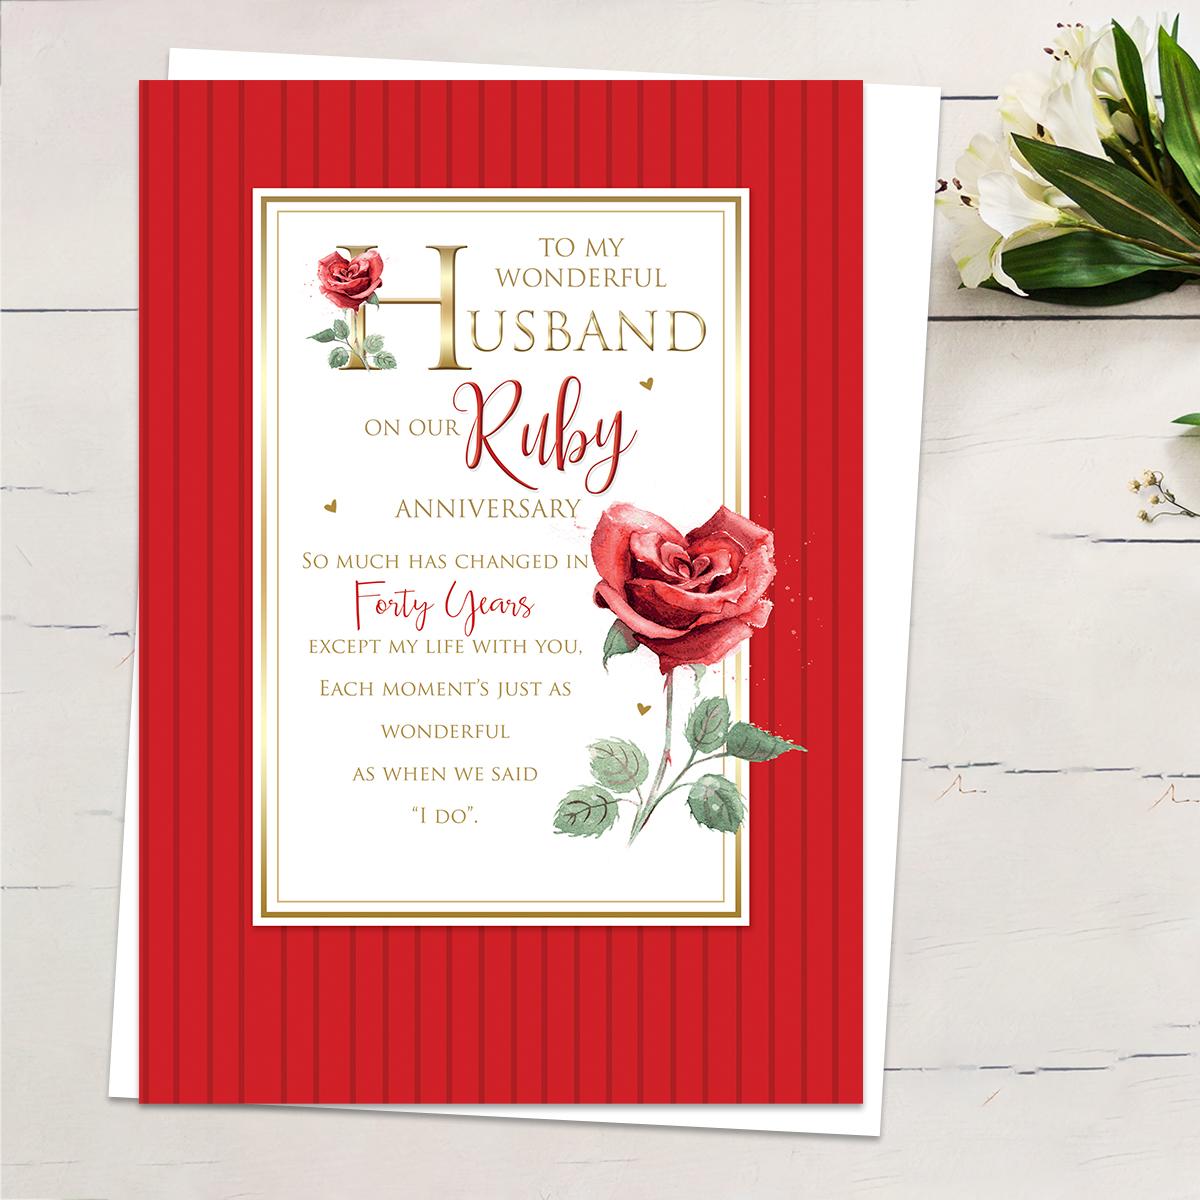 ' To My Wonderful Husband On Our Ruby Anniversary' Featuring Red Stripes With Red Roses And Heartfelt Words Edged In Gold Foiling Detail. Complete With White Envelope